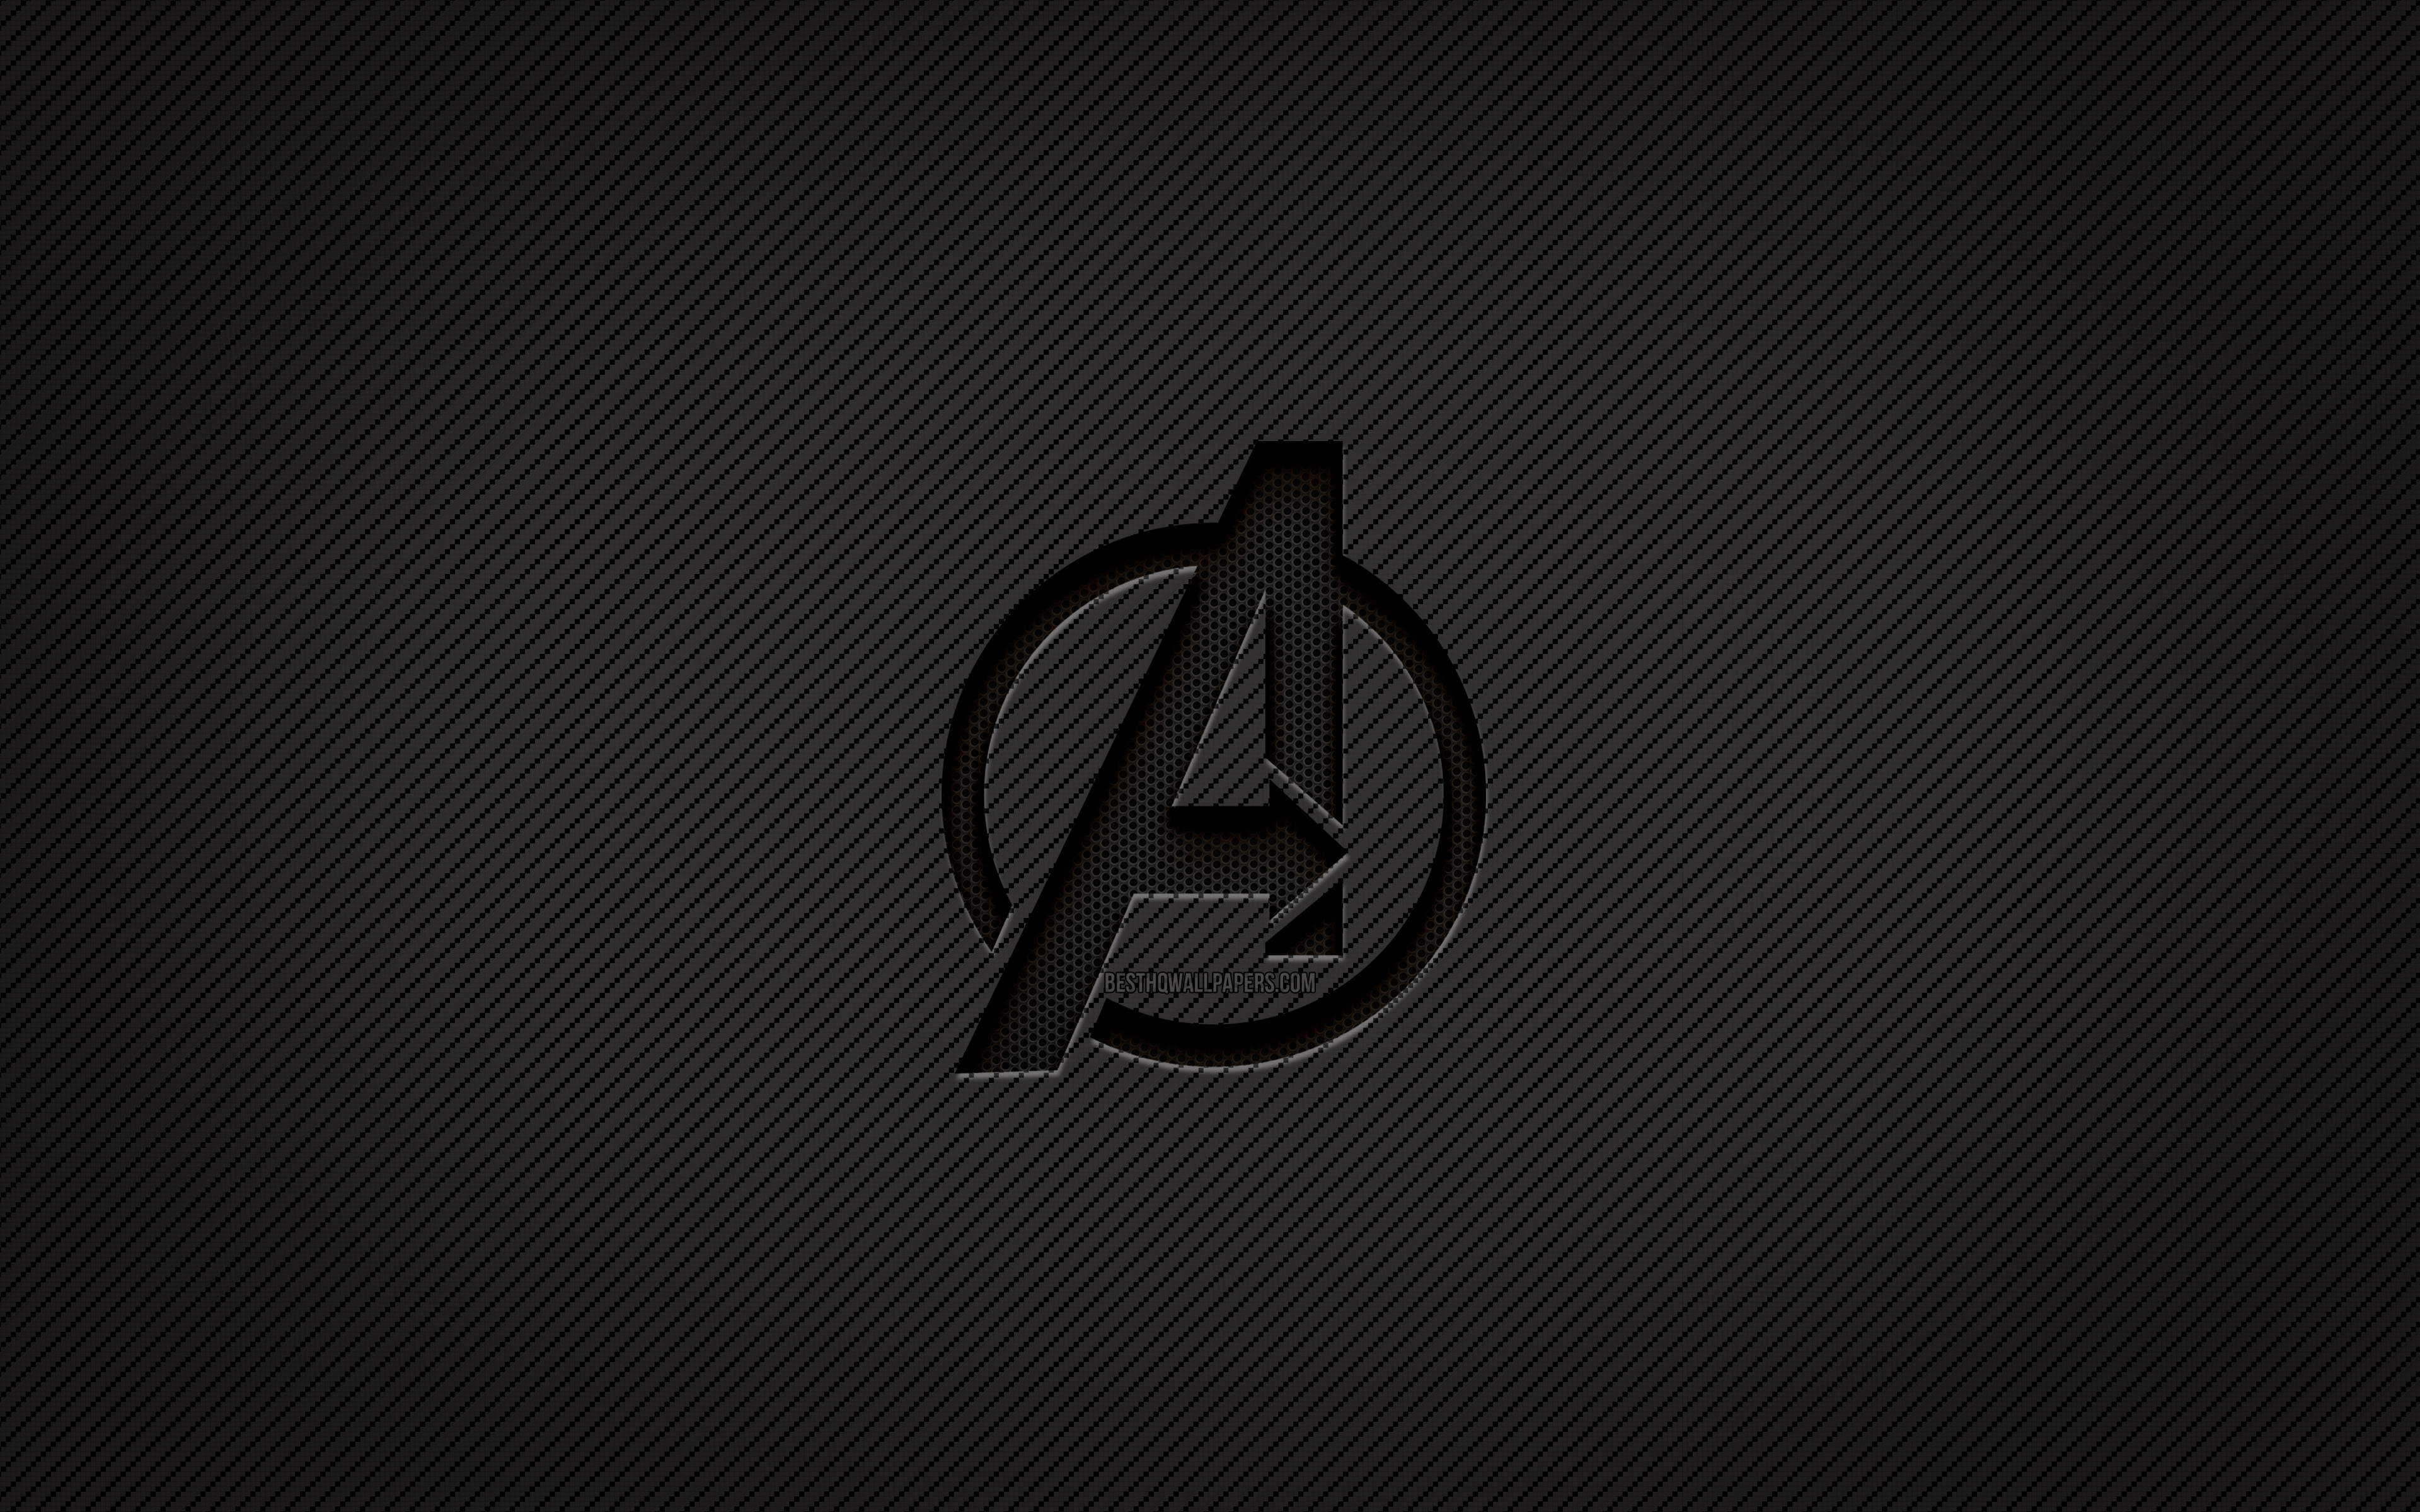 Download wallpapers Avengers carbon logo, 4k, grunge art, carbon  background, creative, Avengers black logo, superheroes, Avengers logo,  Avengers for desktop with resolution 3840x2400. High Quality HD pictures  wallpapers